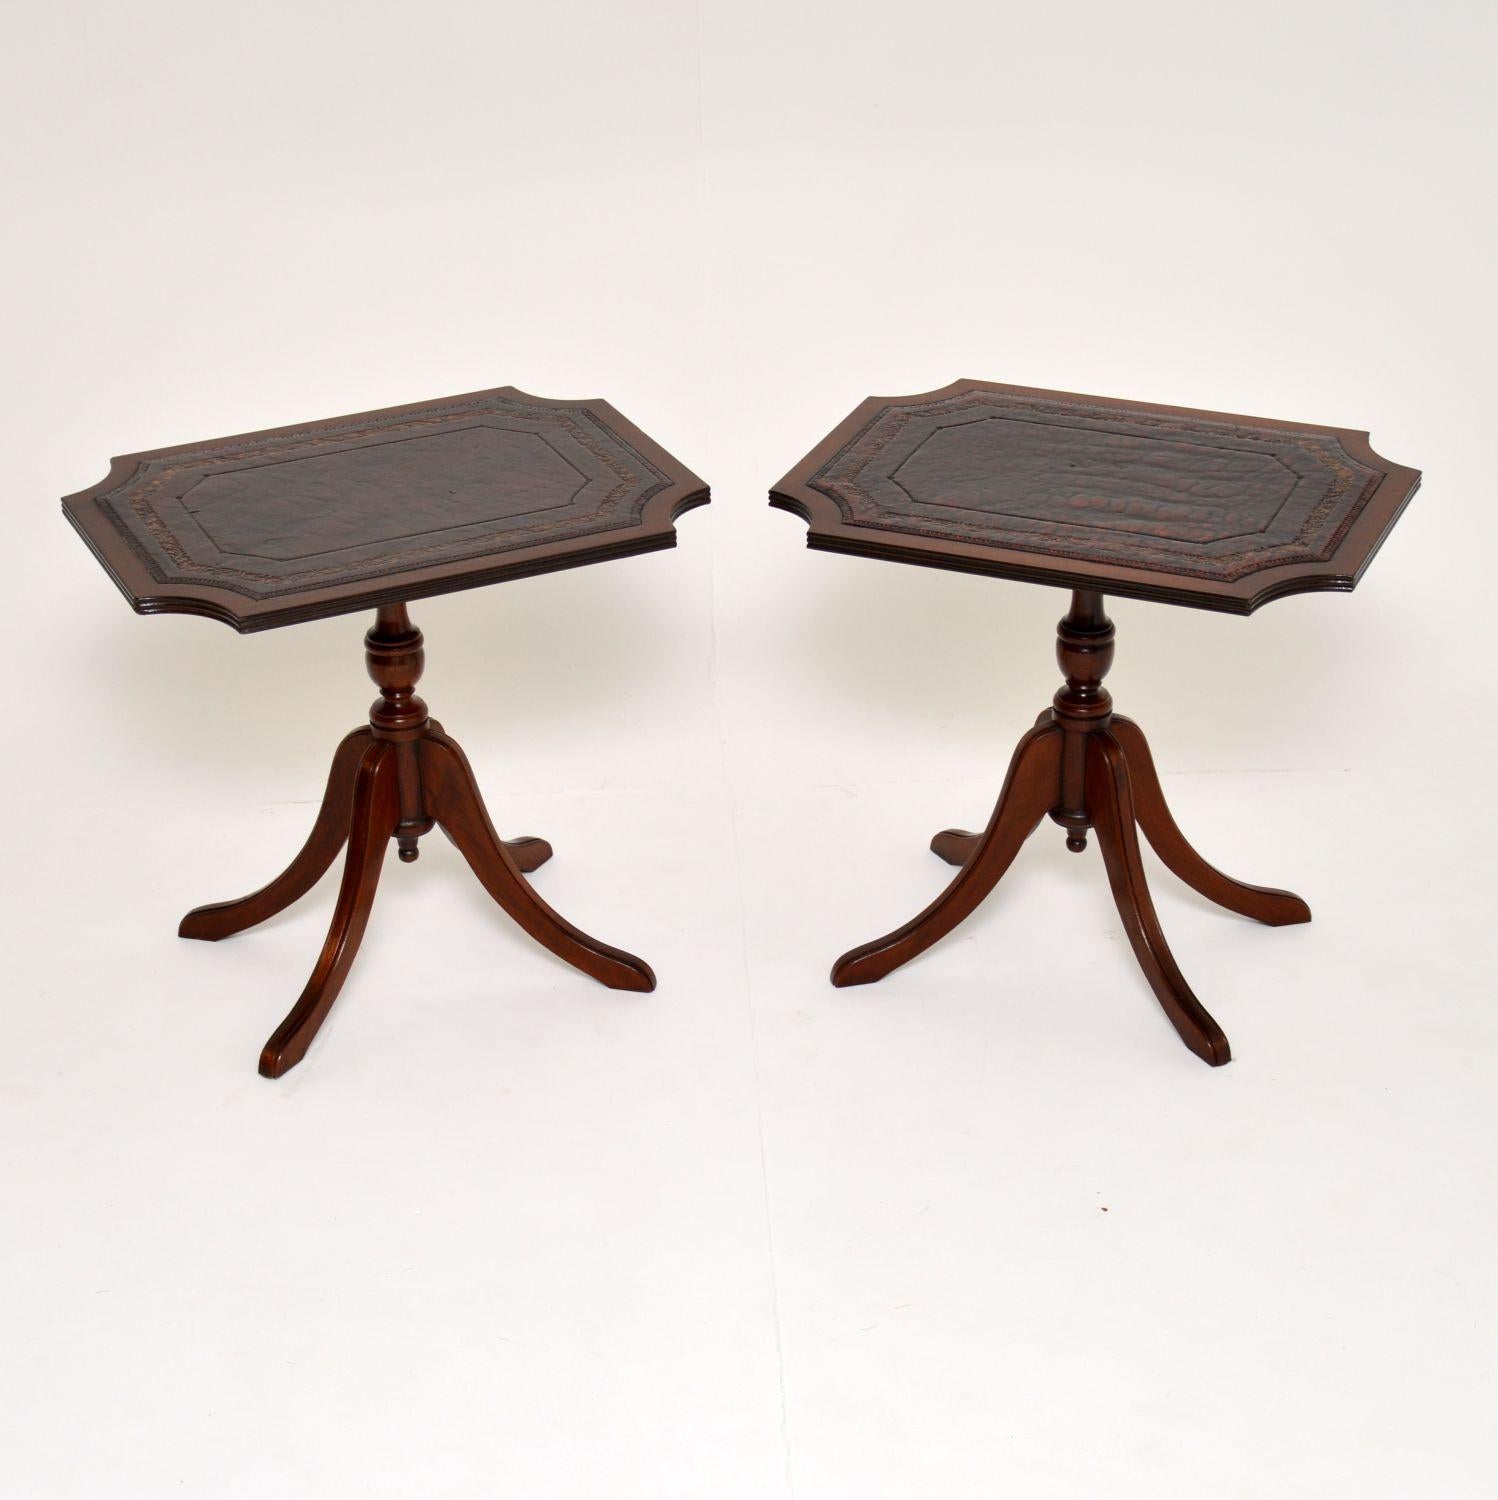 Pair of antique Regency style side tables with original tooled leather tops & in good original condition, dating from circa 1950s period.

They have curved corners on the tops which have reeded edges. The turned baluster pedestals sit on quadruple